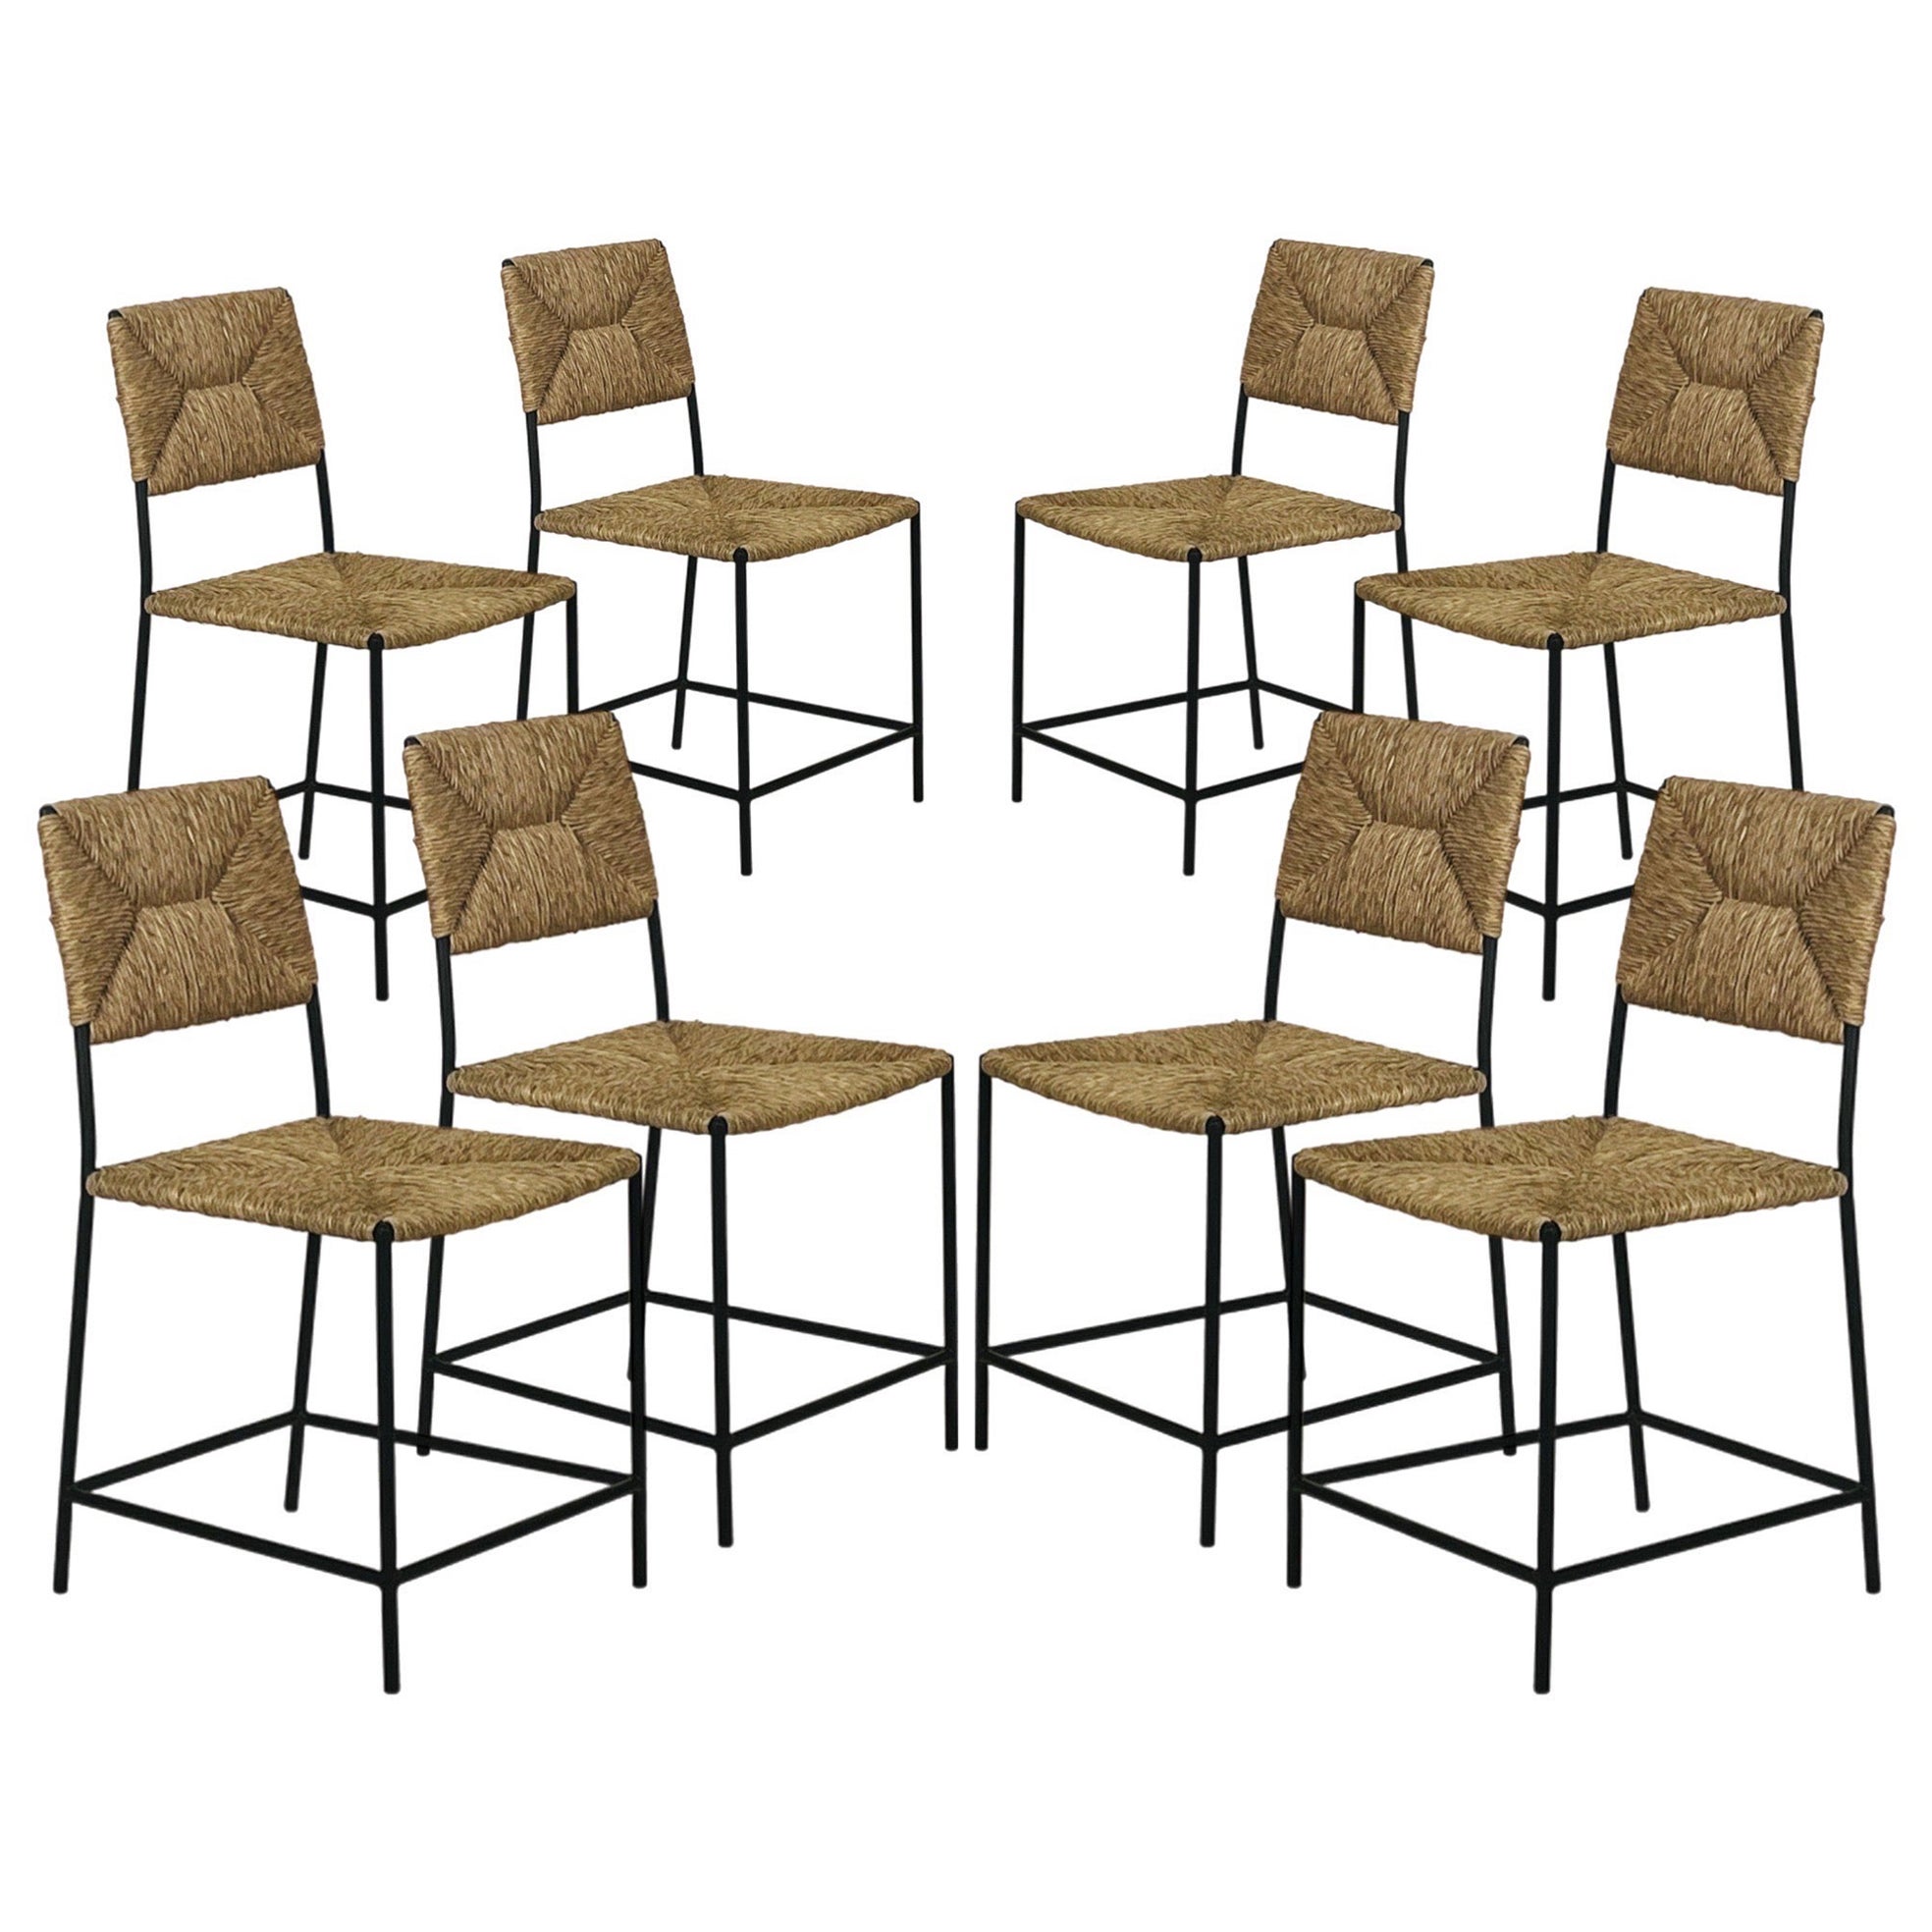 Set of 8 'Campagne' Dining Chairs by Design Frères